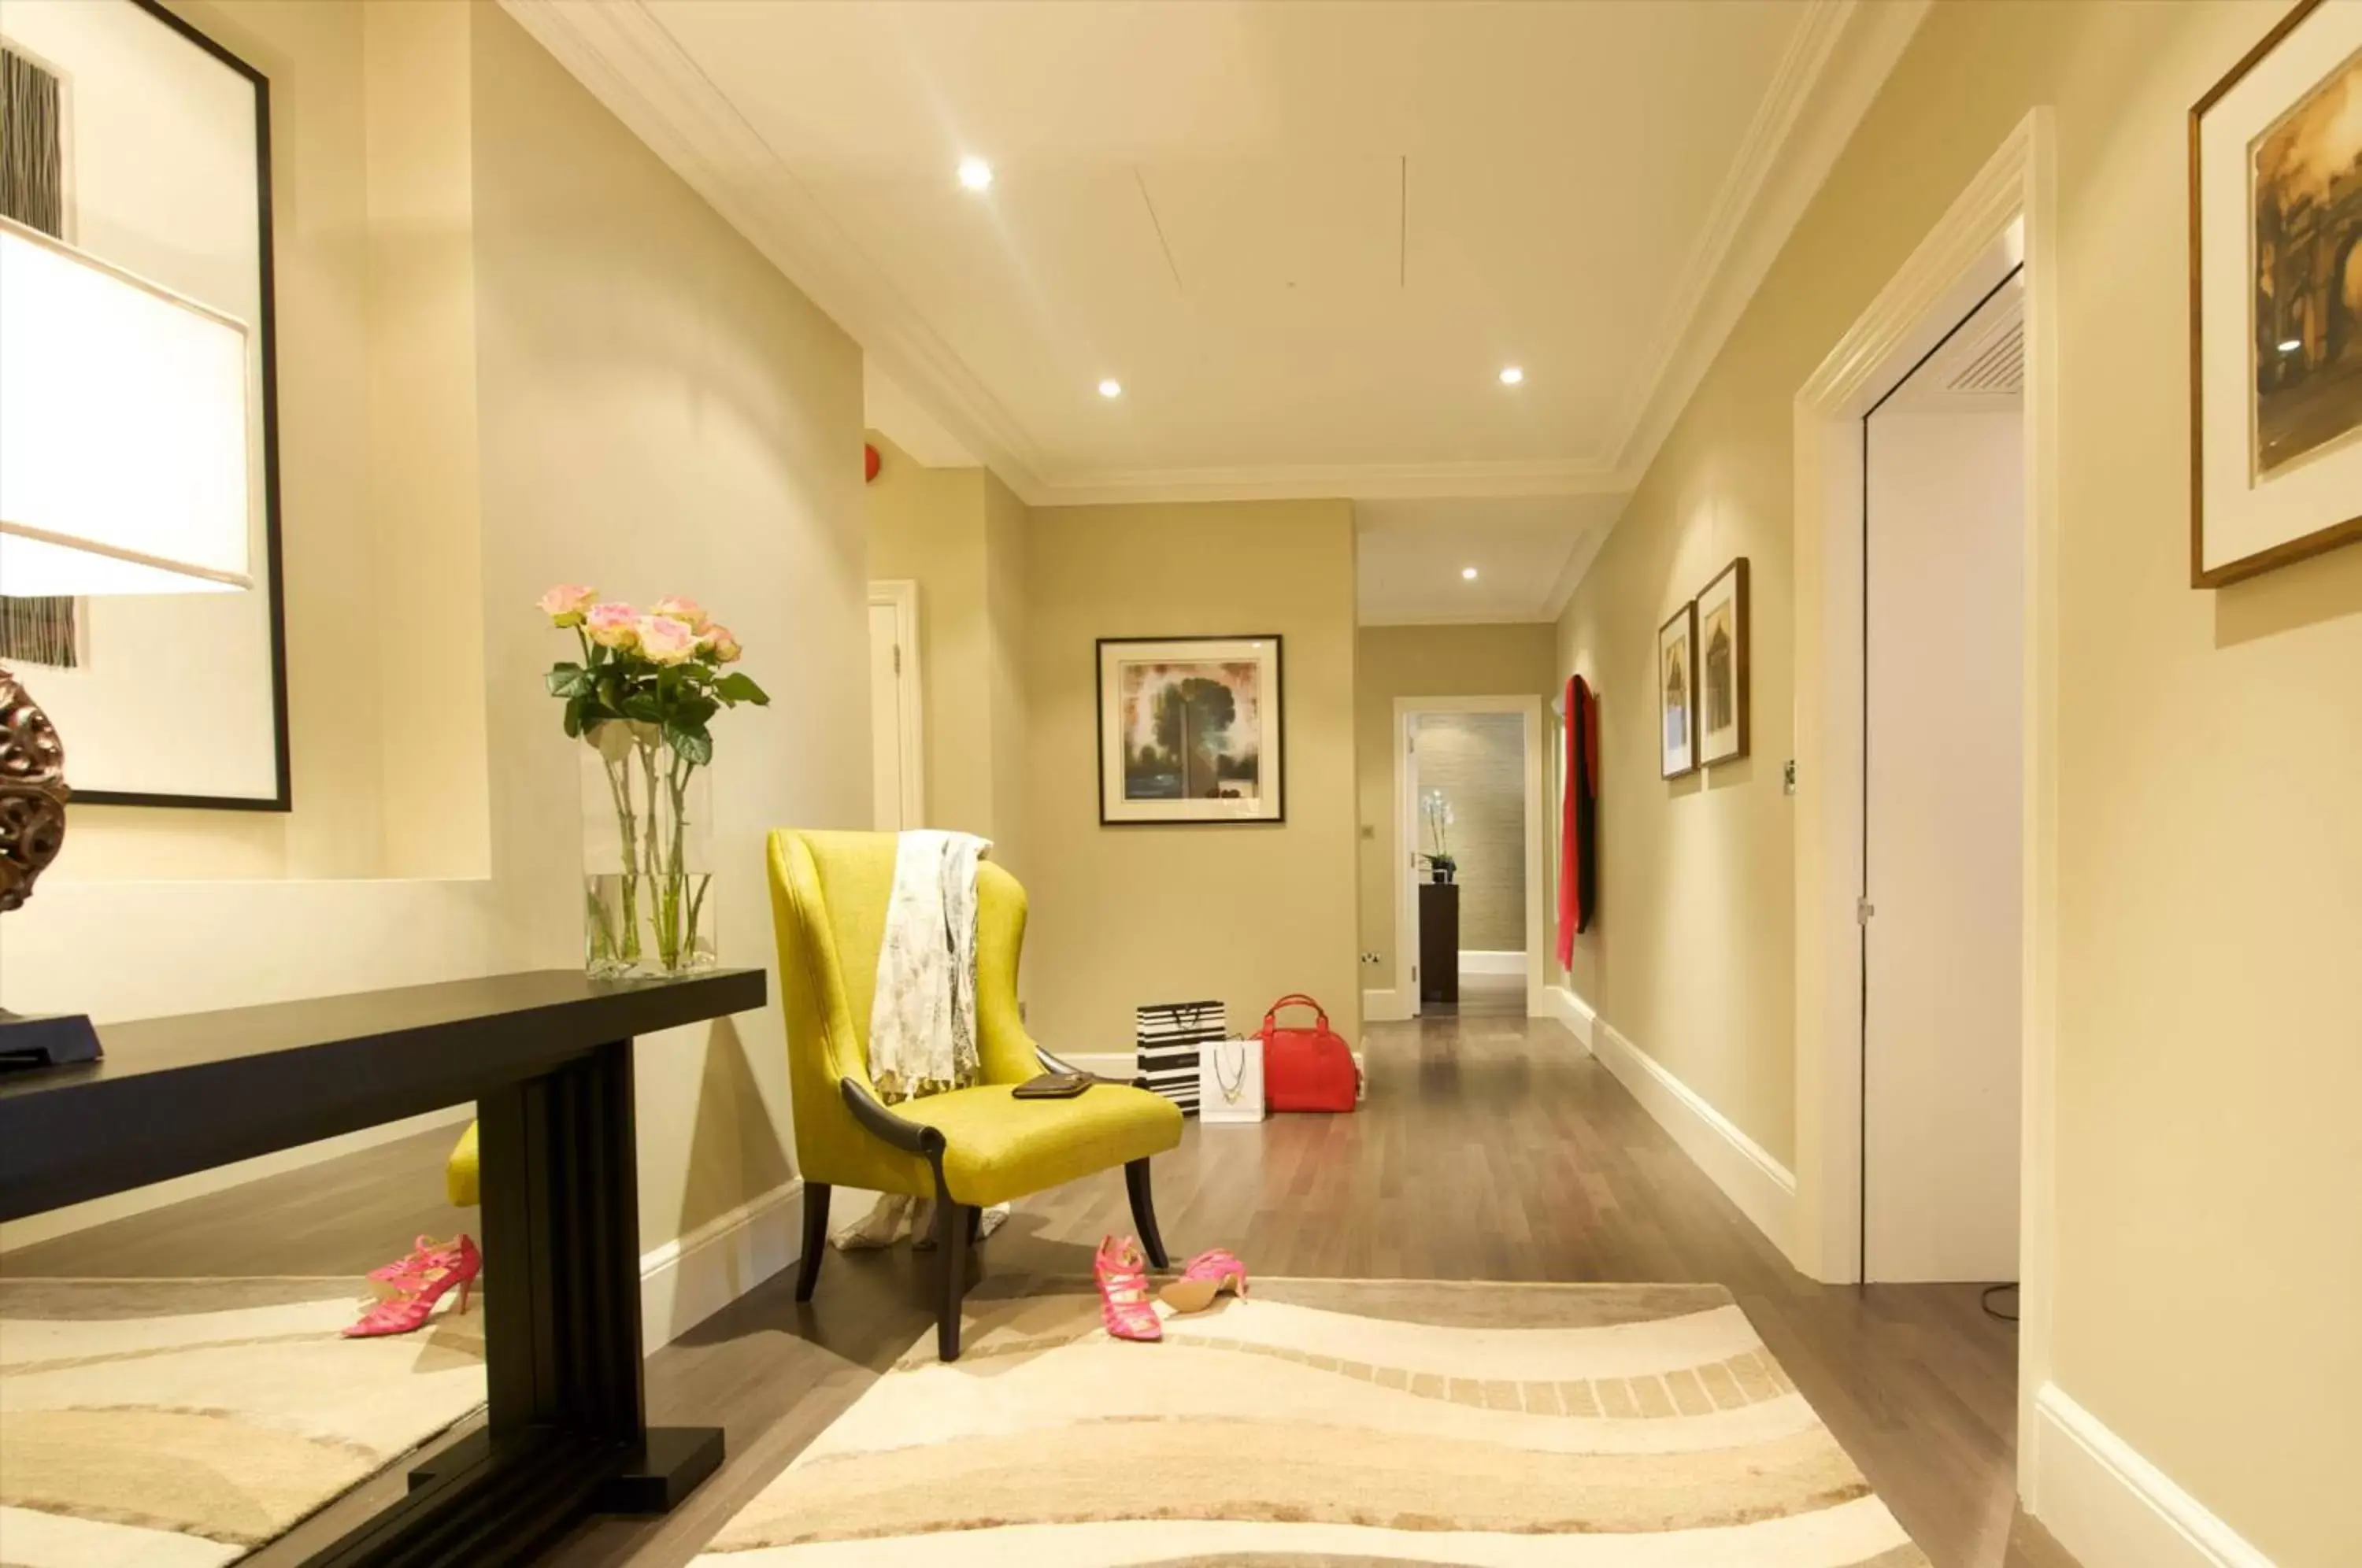 Area and facilities, Lobby/Reception in Taj 51 Buckingham Gate Suites and Residences